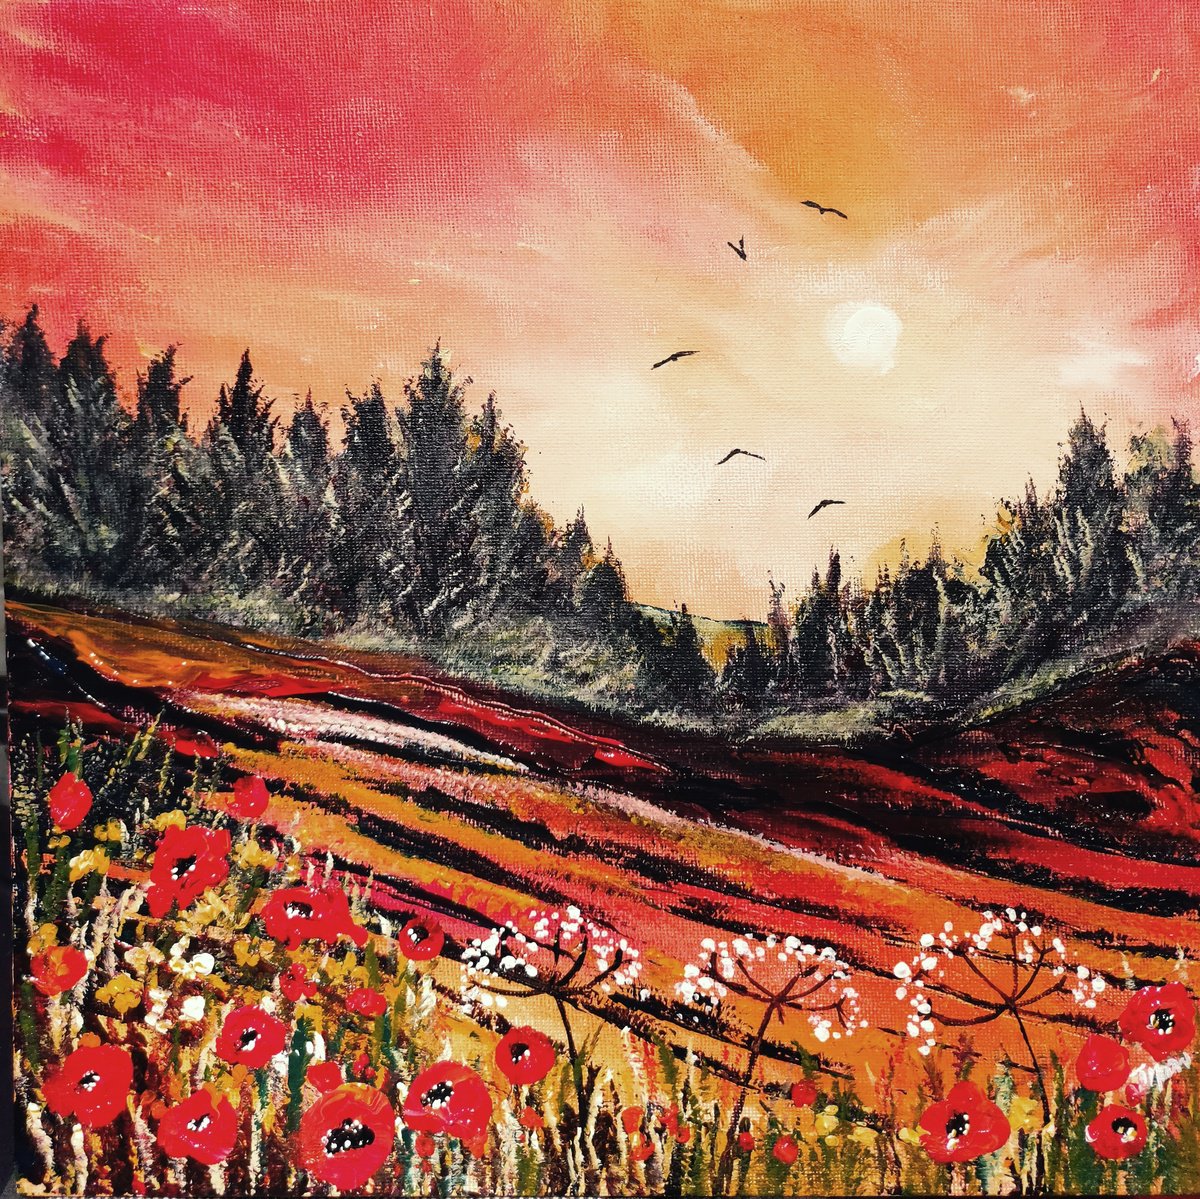 The Red Field by Jenny Moran